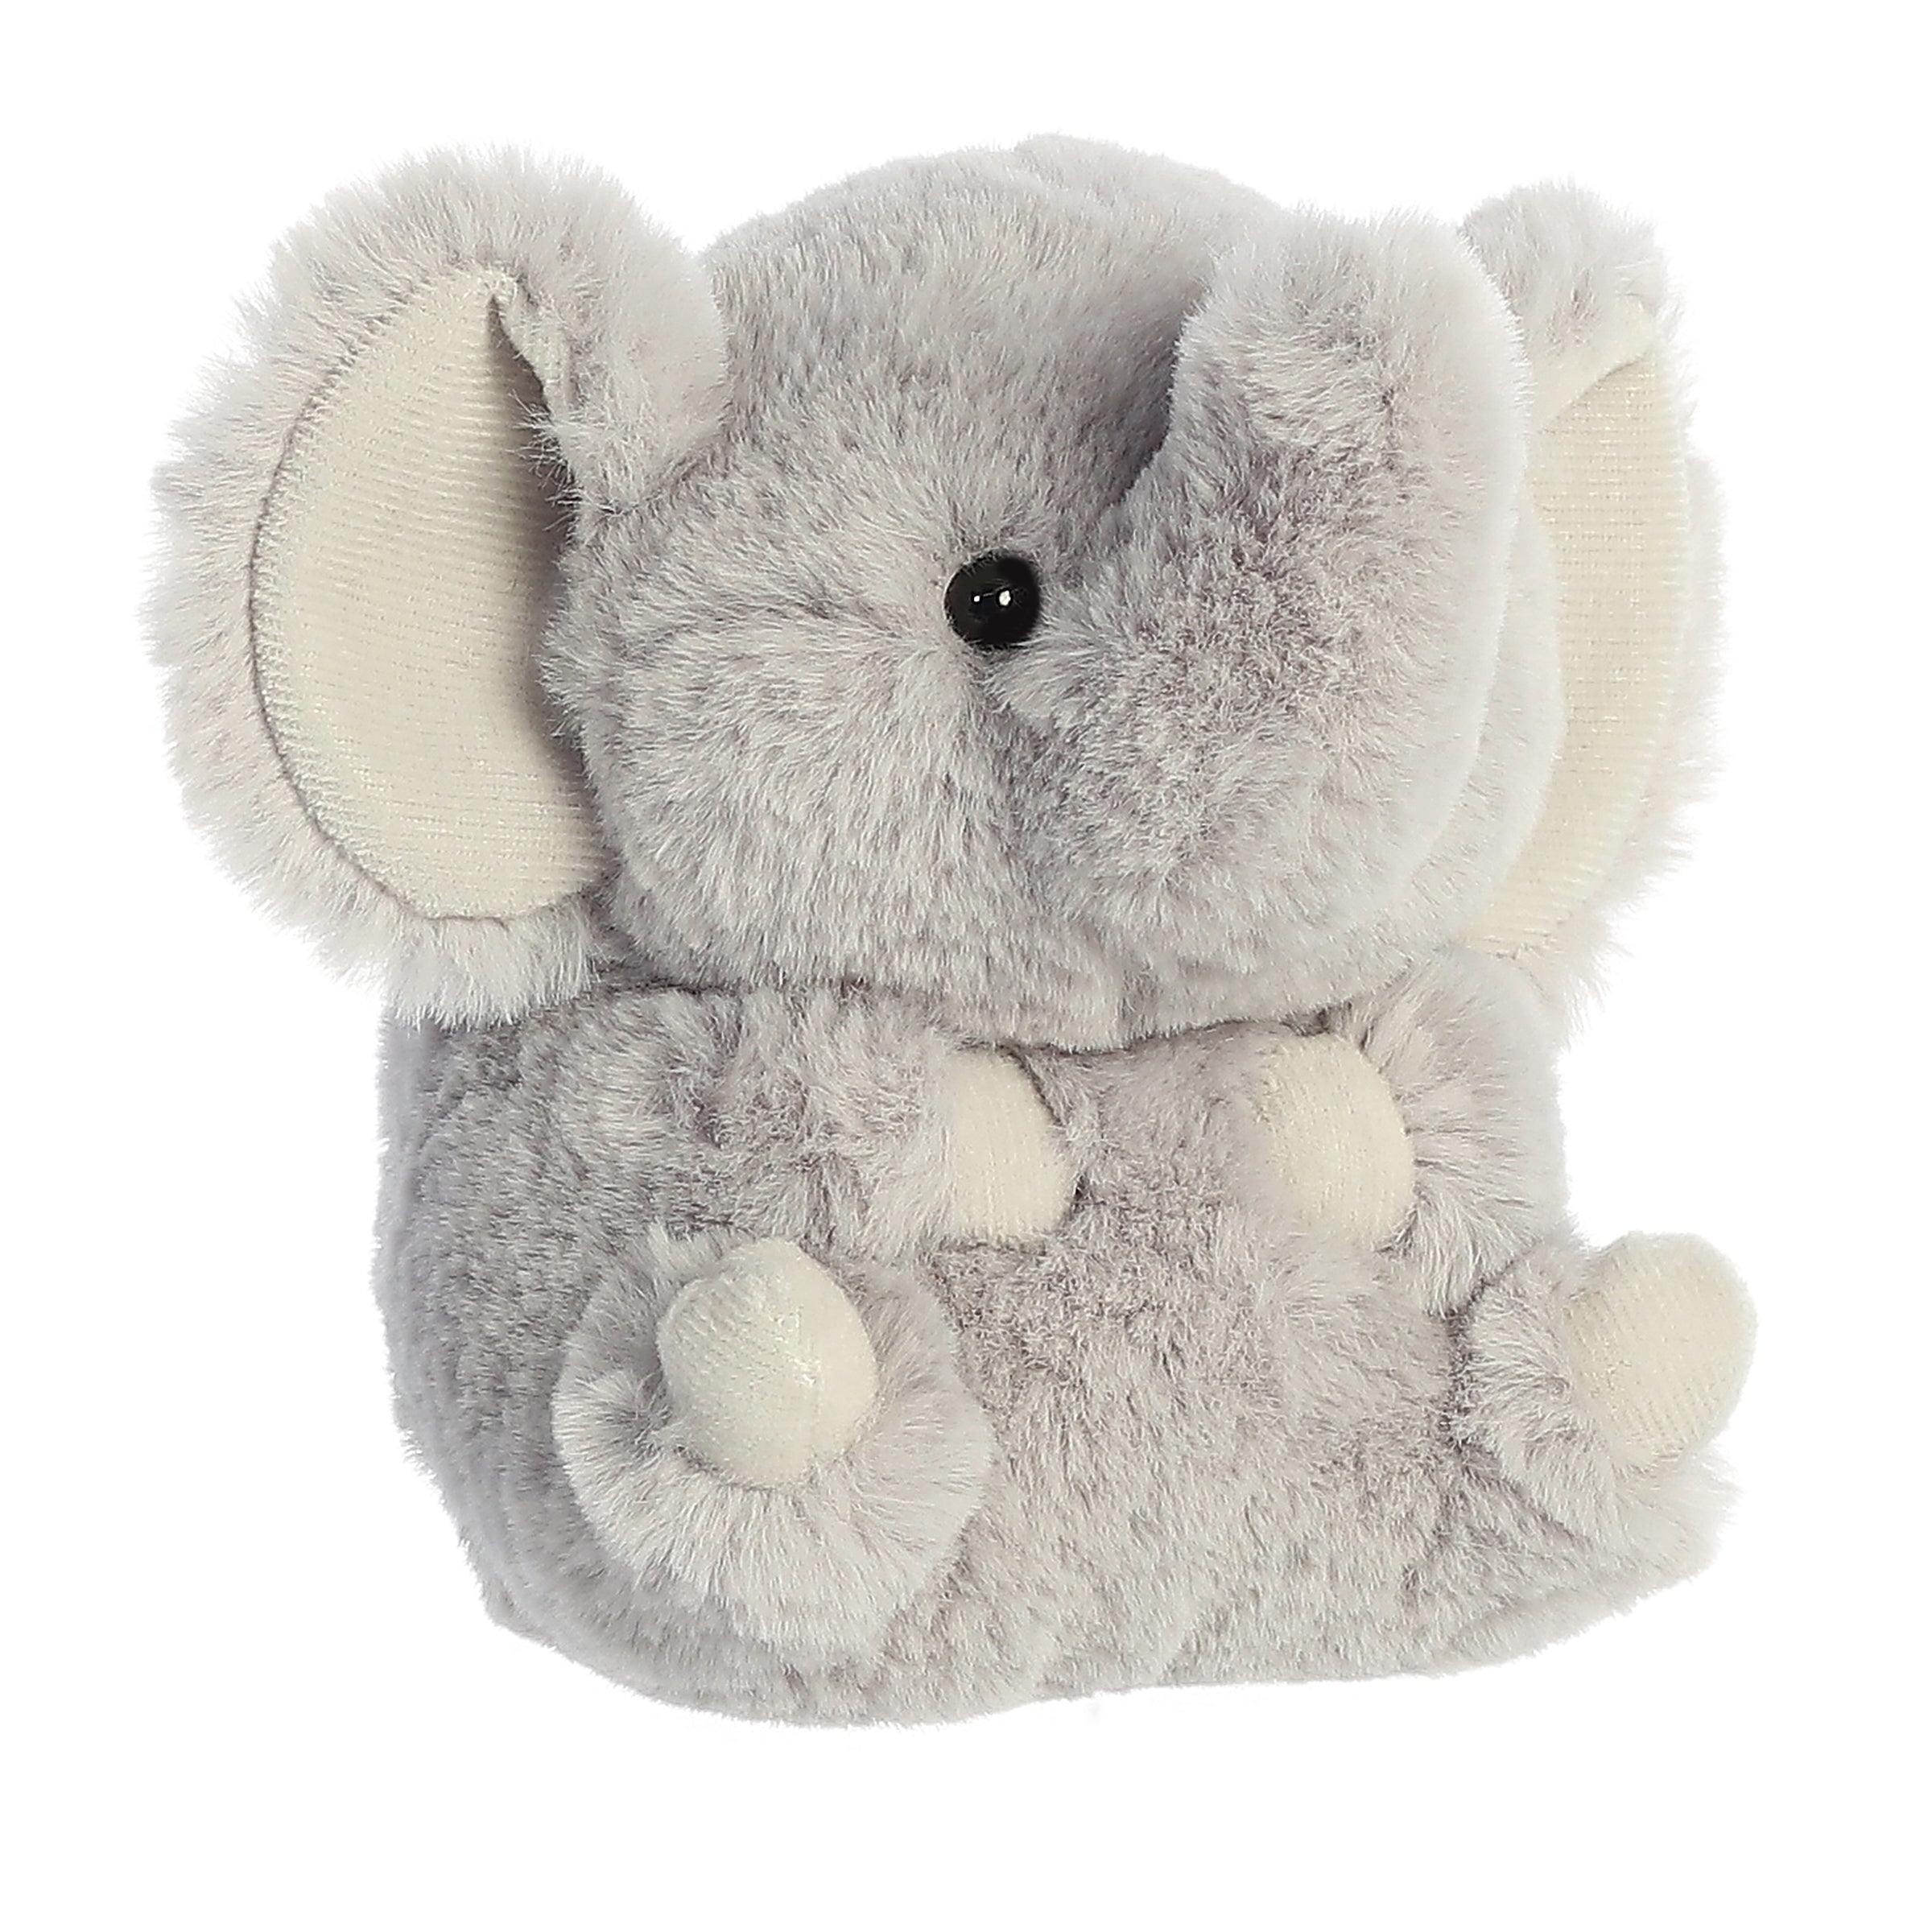 Fluffy gray Elephant plush with large ears and a joyful pose, hugging its tummy with its cute legs playfully up in the air.